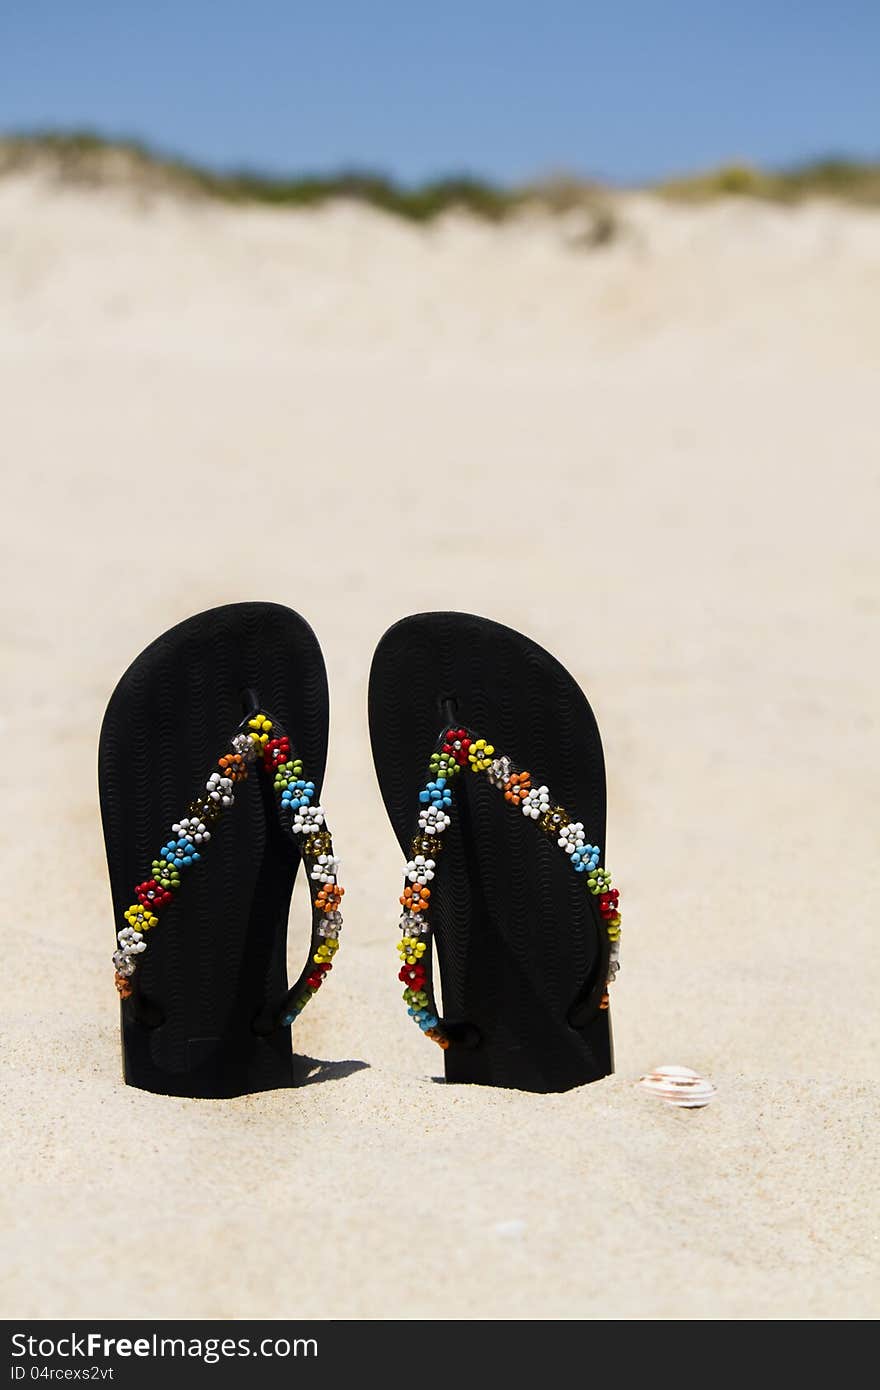 View of two beach sandals with flower detail stuck on the sand.